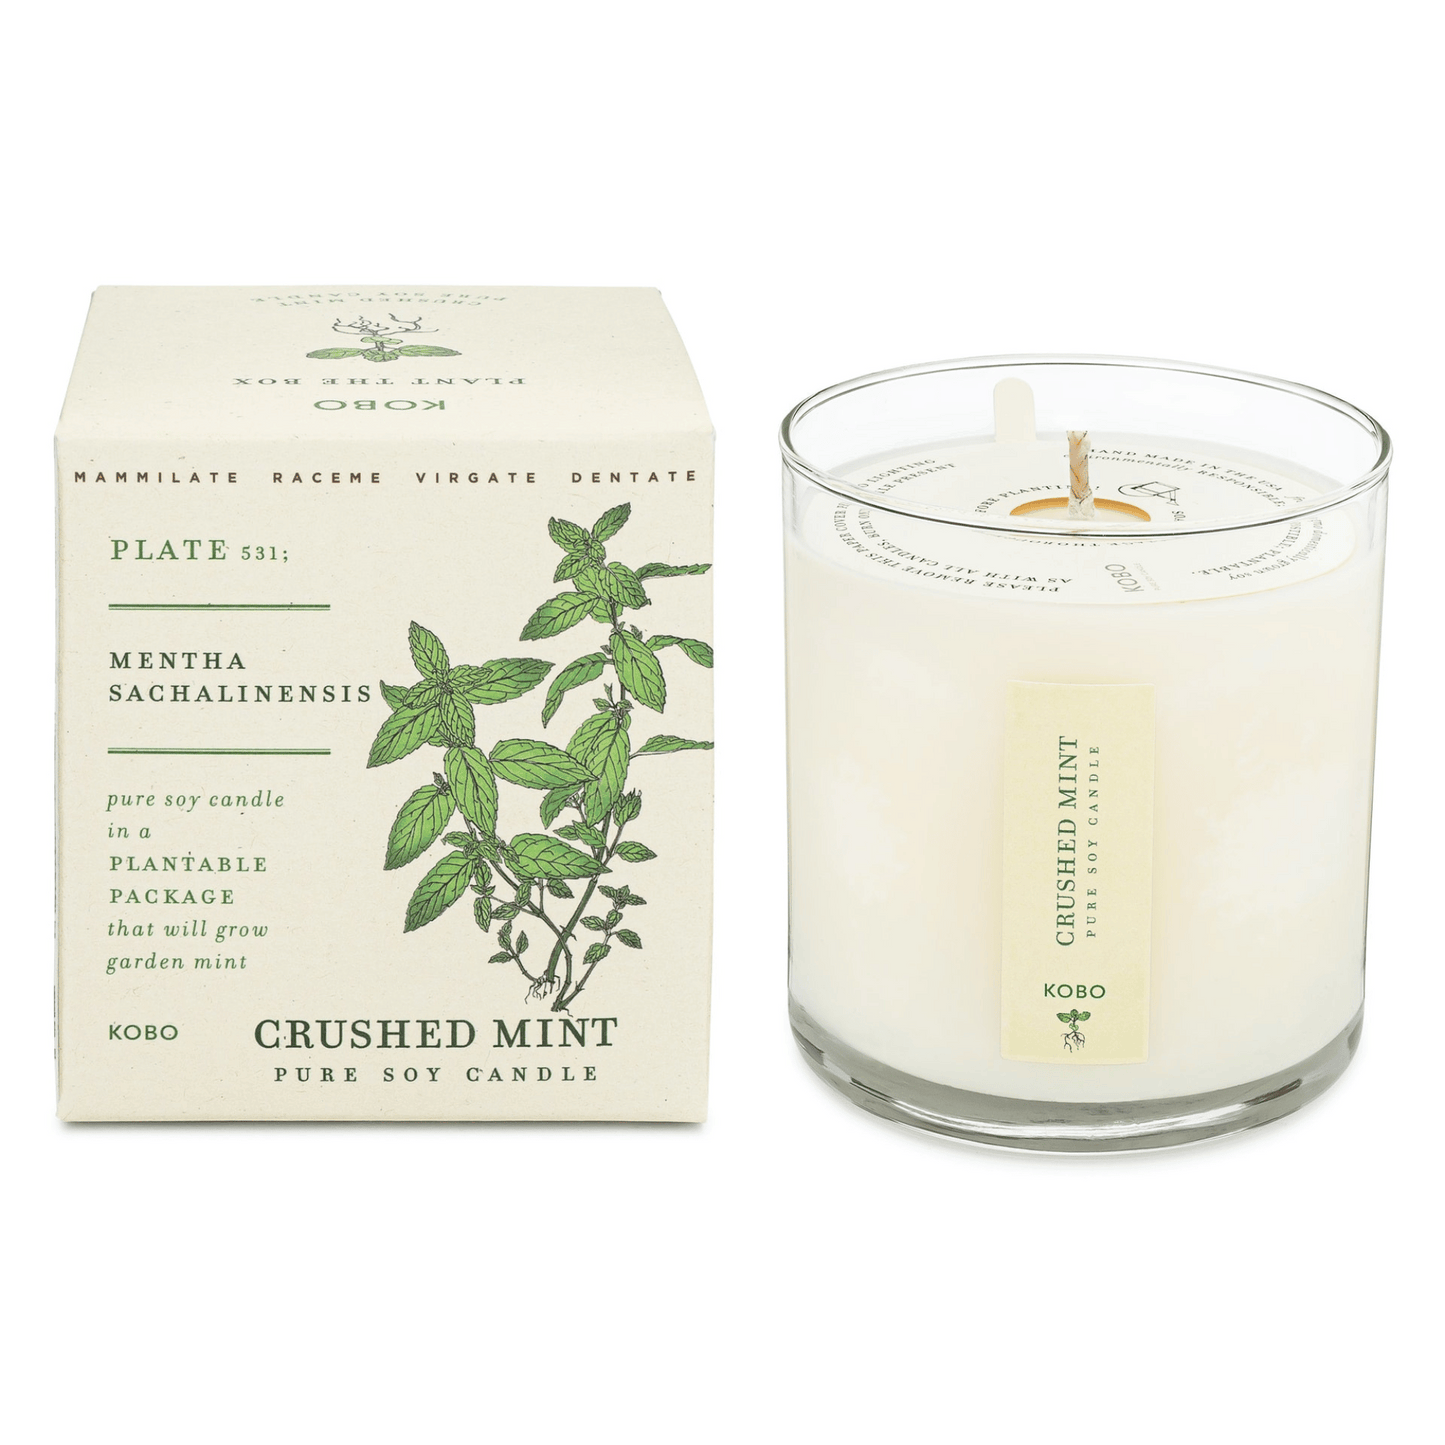 Primary Image of Crushed Mint Plant the Box Candle